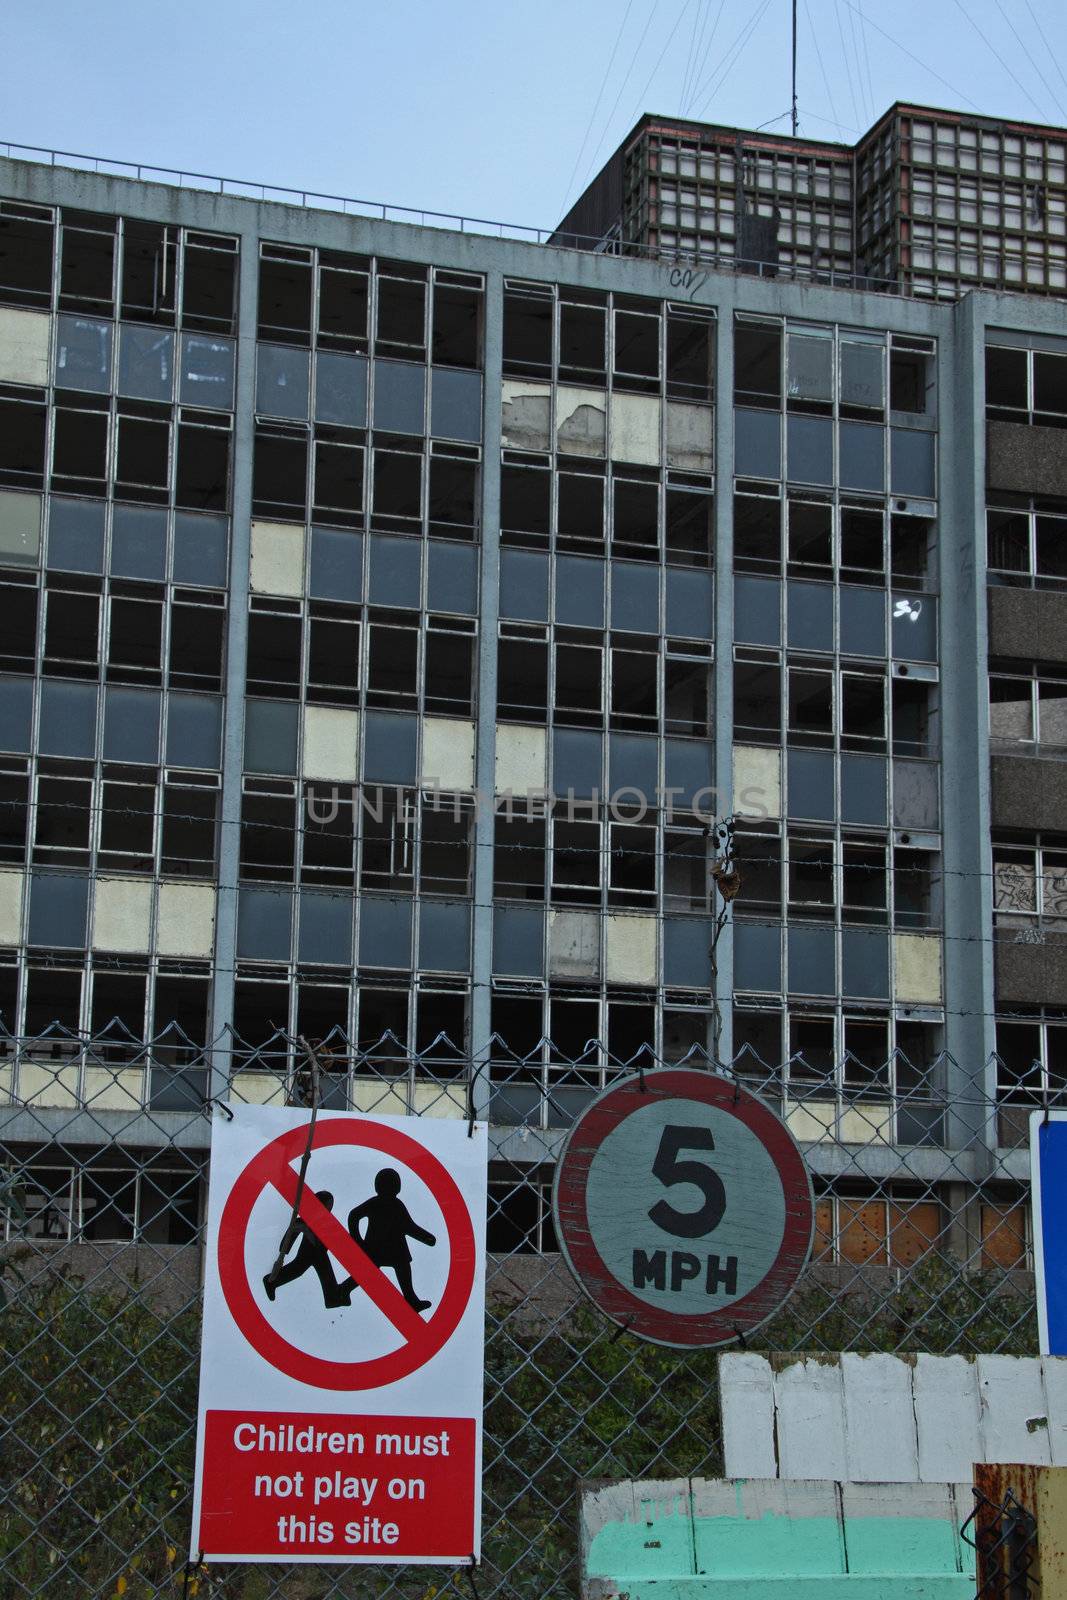 Warning signs outside abandoned buildings in Bristol by pjhpix